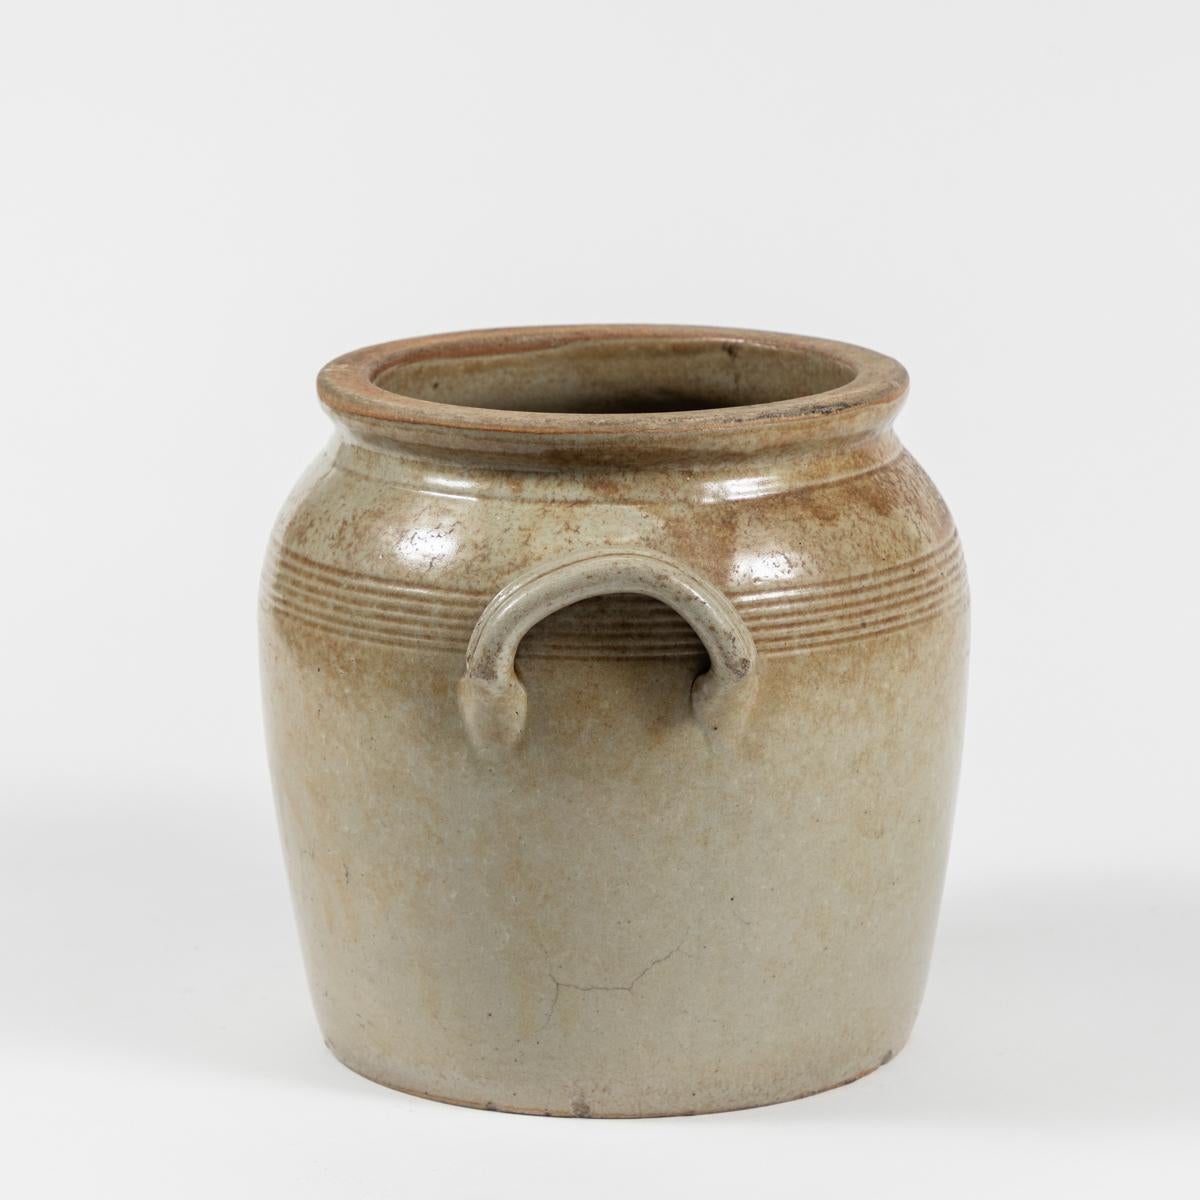 Late 19th-century English clay hard-soldered pot with a taupe semi-matte aged finish. Earthy and serene, the vessel features a thin rounded lip and raised handles on either side, and could work as both decorative and functional object. 

England,